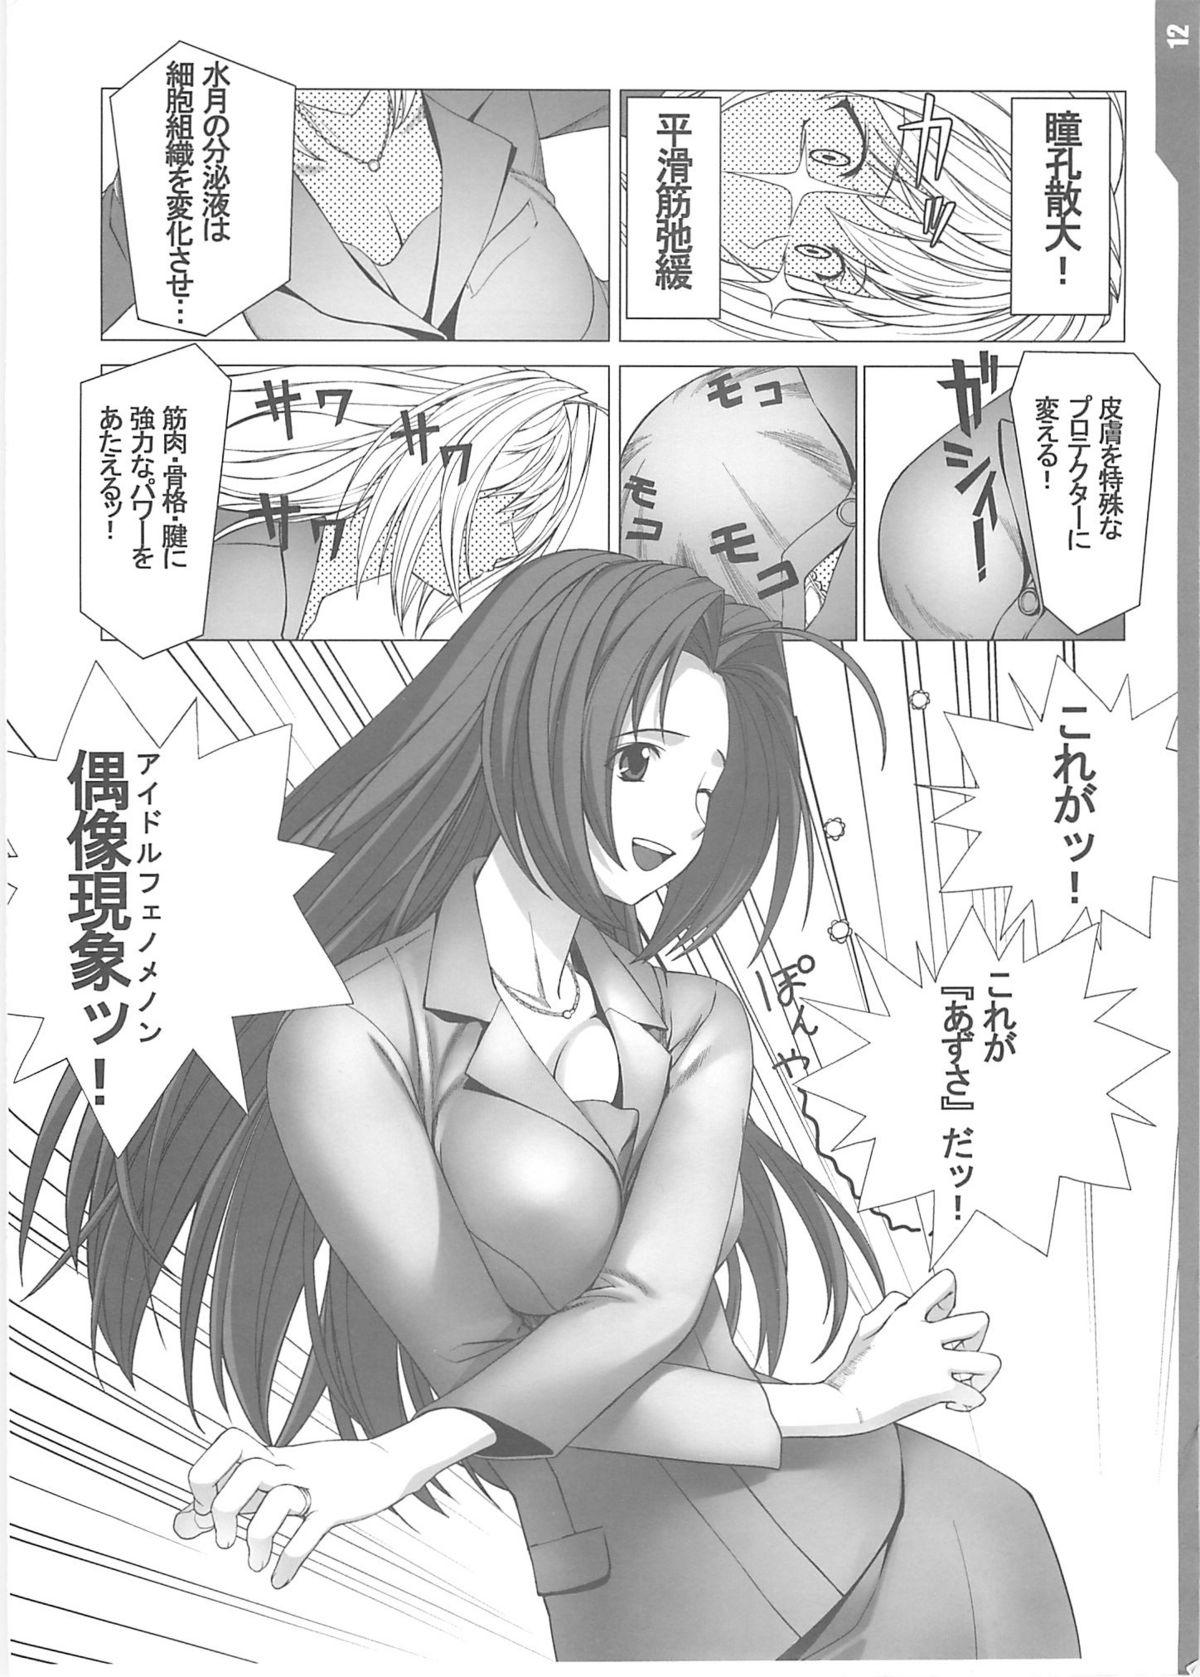 Transsexual Enikki Recycle 7 no Omake Hon - Beat Angel - The idolmaster Wam - Page 12